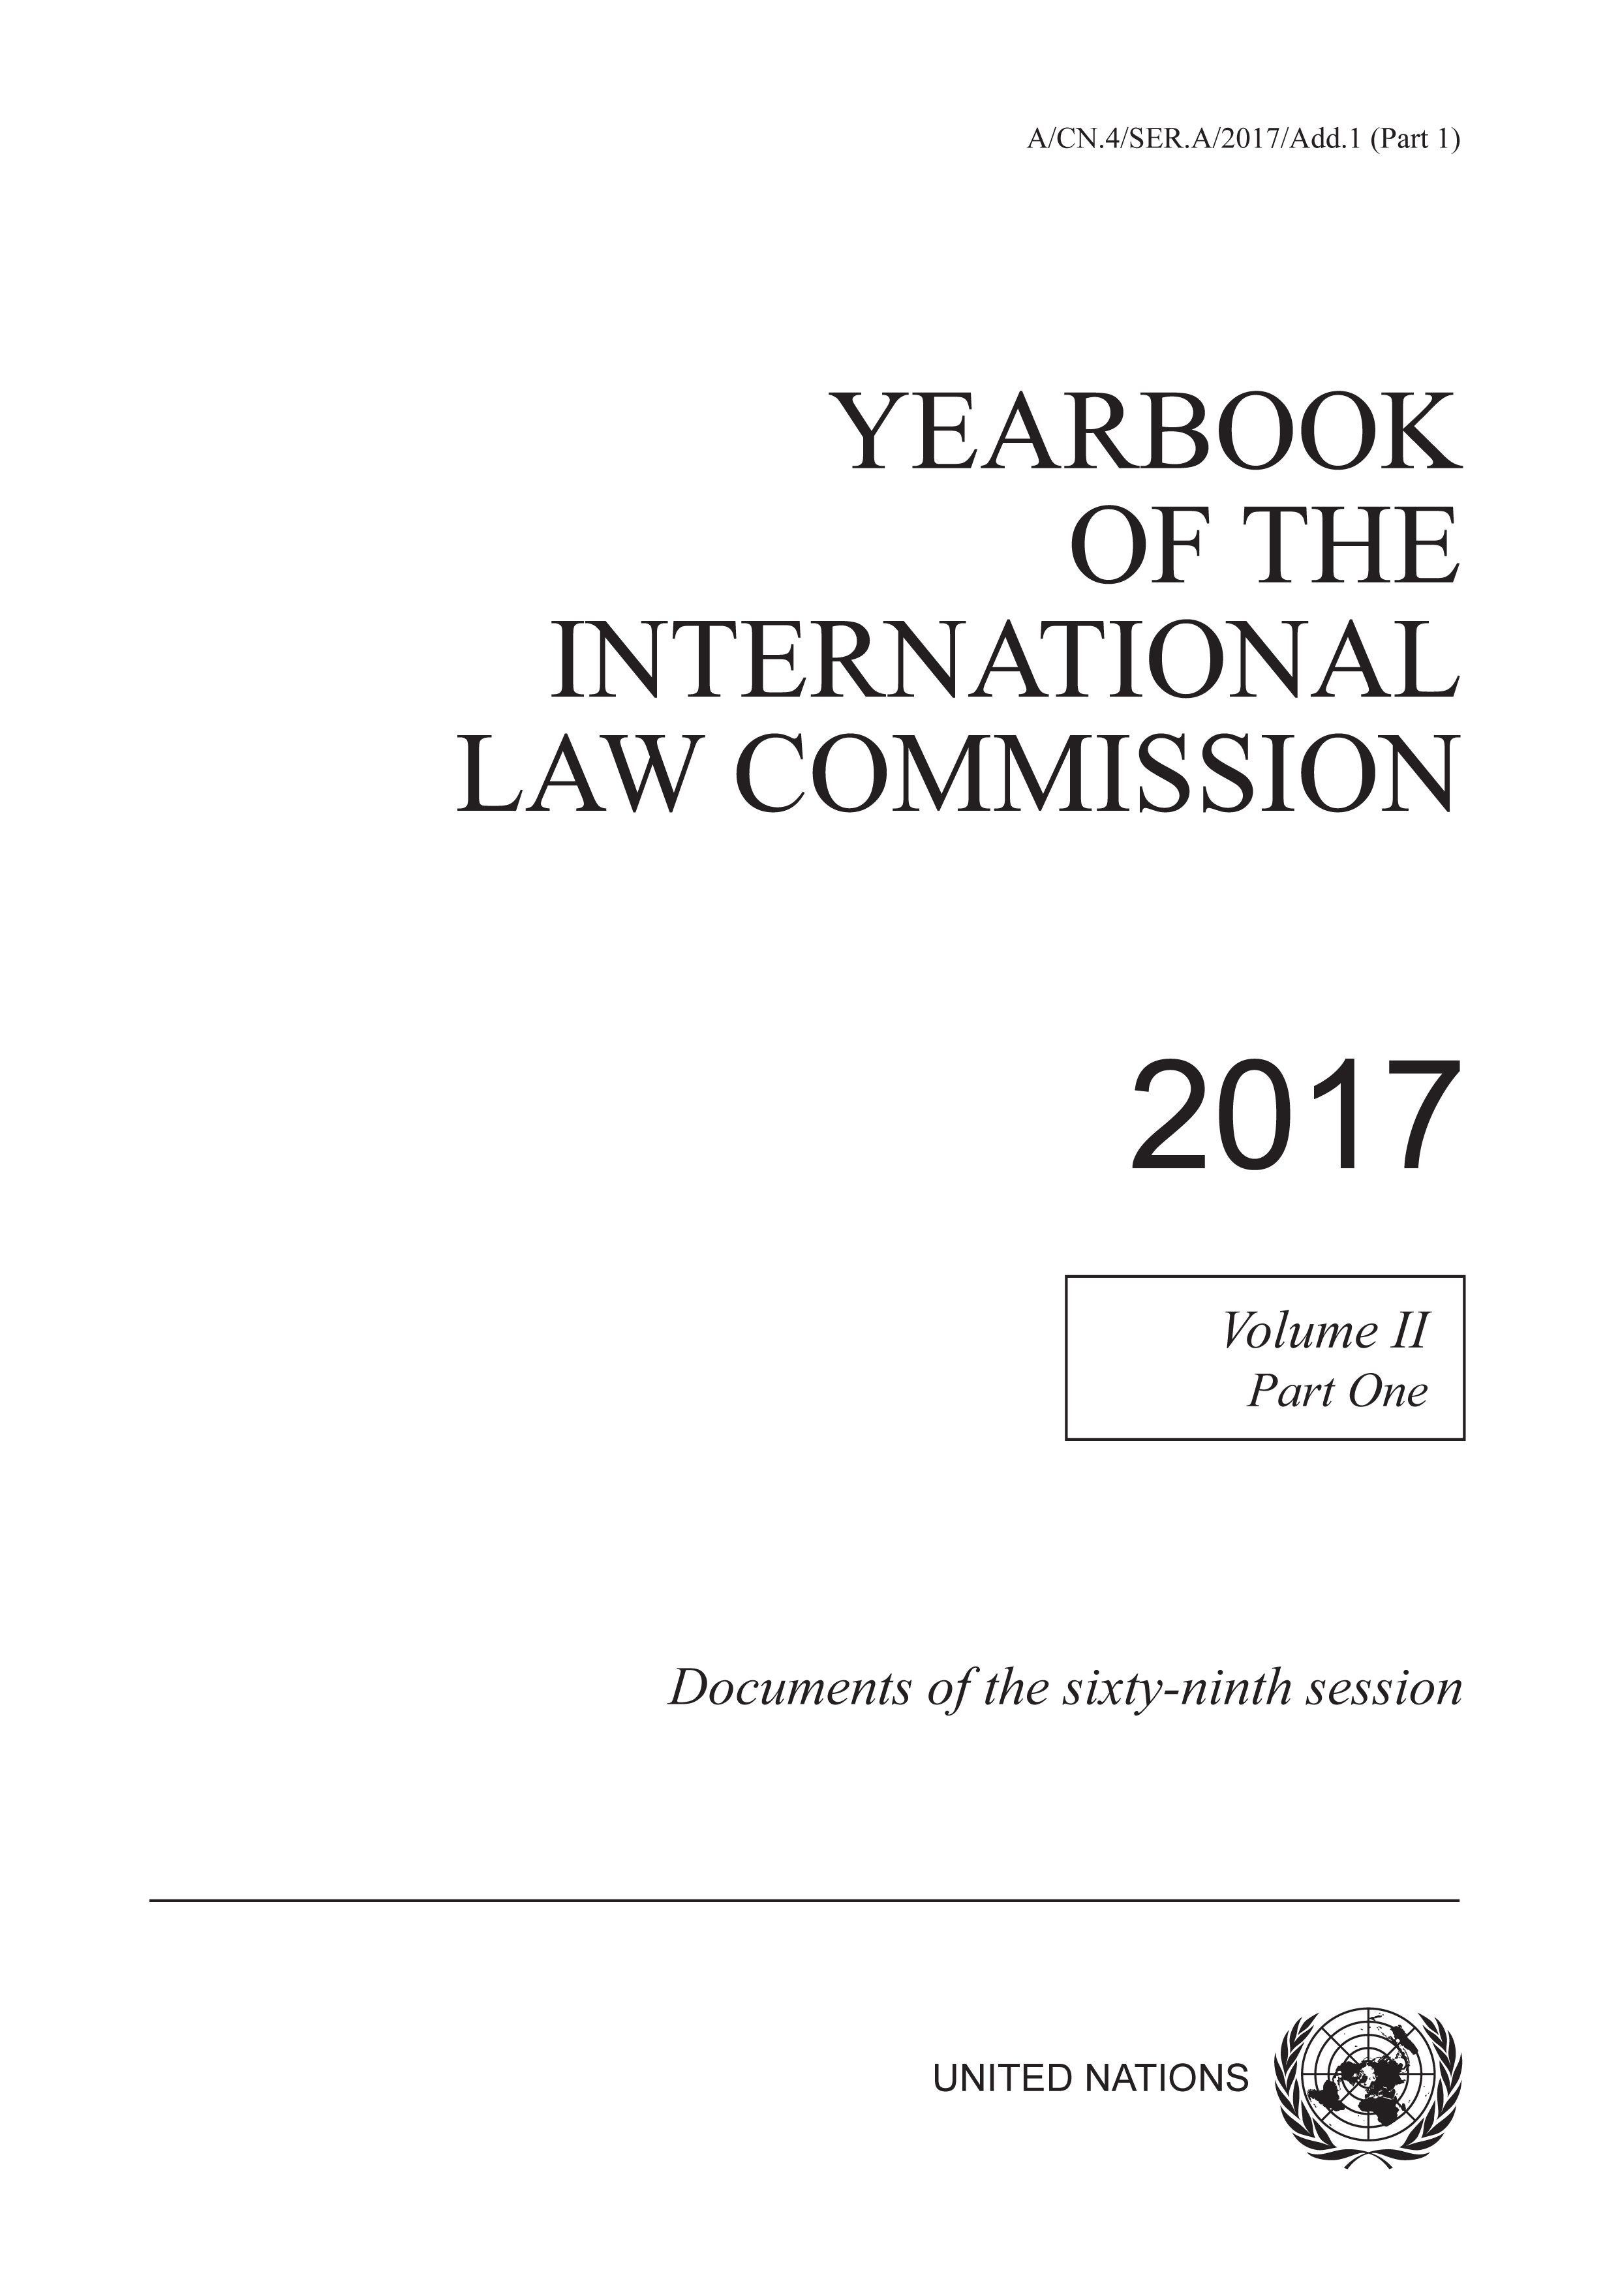 image of Yearbook of the International Law Commission 2017, Vol. II, Part 1